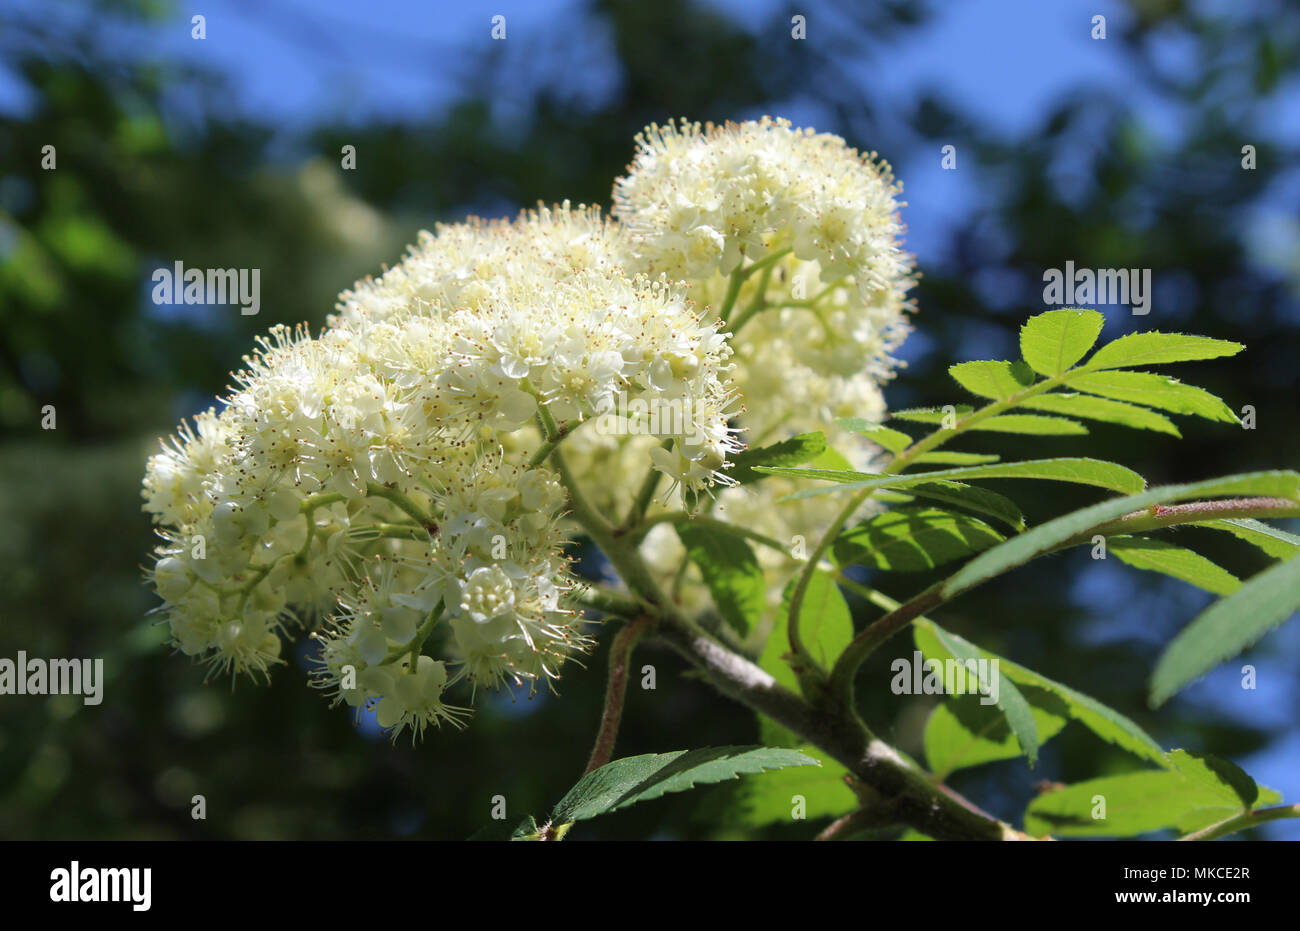 The beautiful white blossoms of Sorbus aucuparia, also known as ...